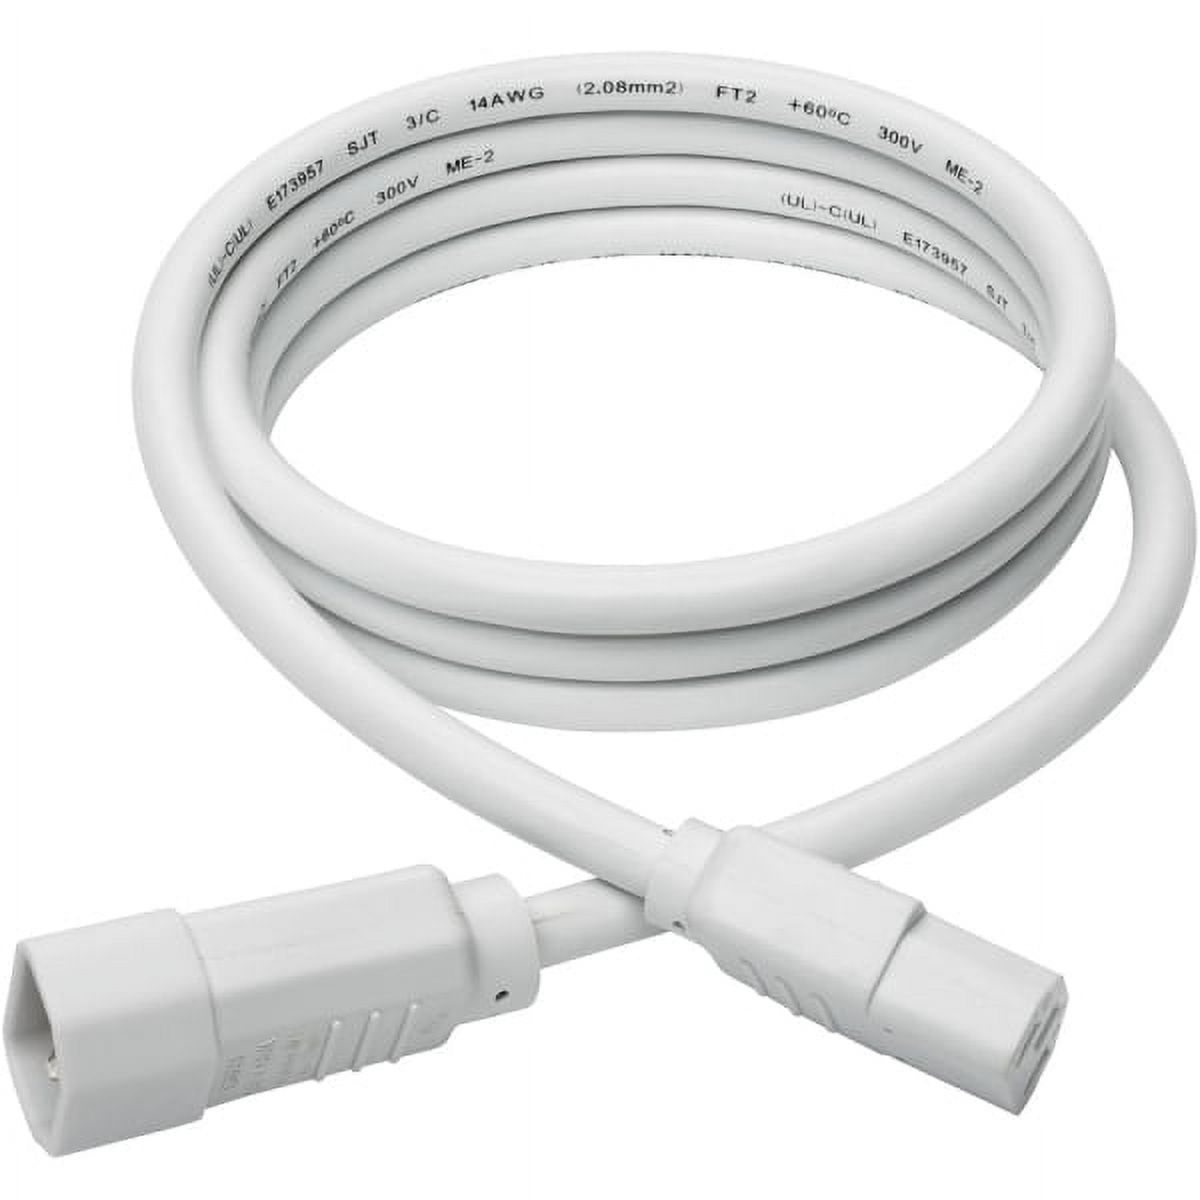 Eaton Tripp Lite Series Heavy-Duty PDU Power Cord, C13 to C14 - 15A, 250V, 14 AWG, 6 ft. (1.83 m), White - Power extension cable - IEC 60320 C14 to power IEC 60320 C13 - 6 ft - white - image 2 of 5